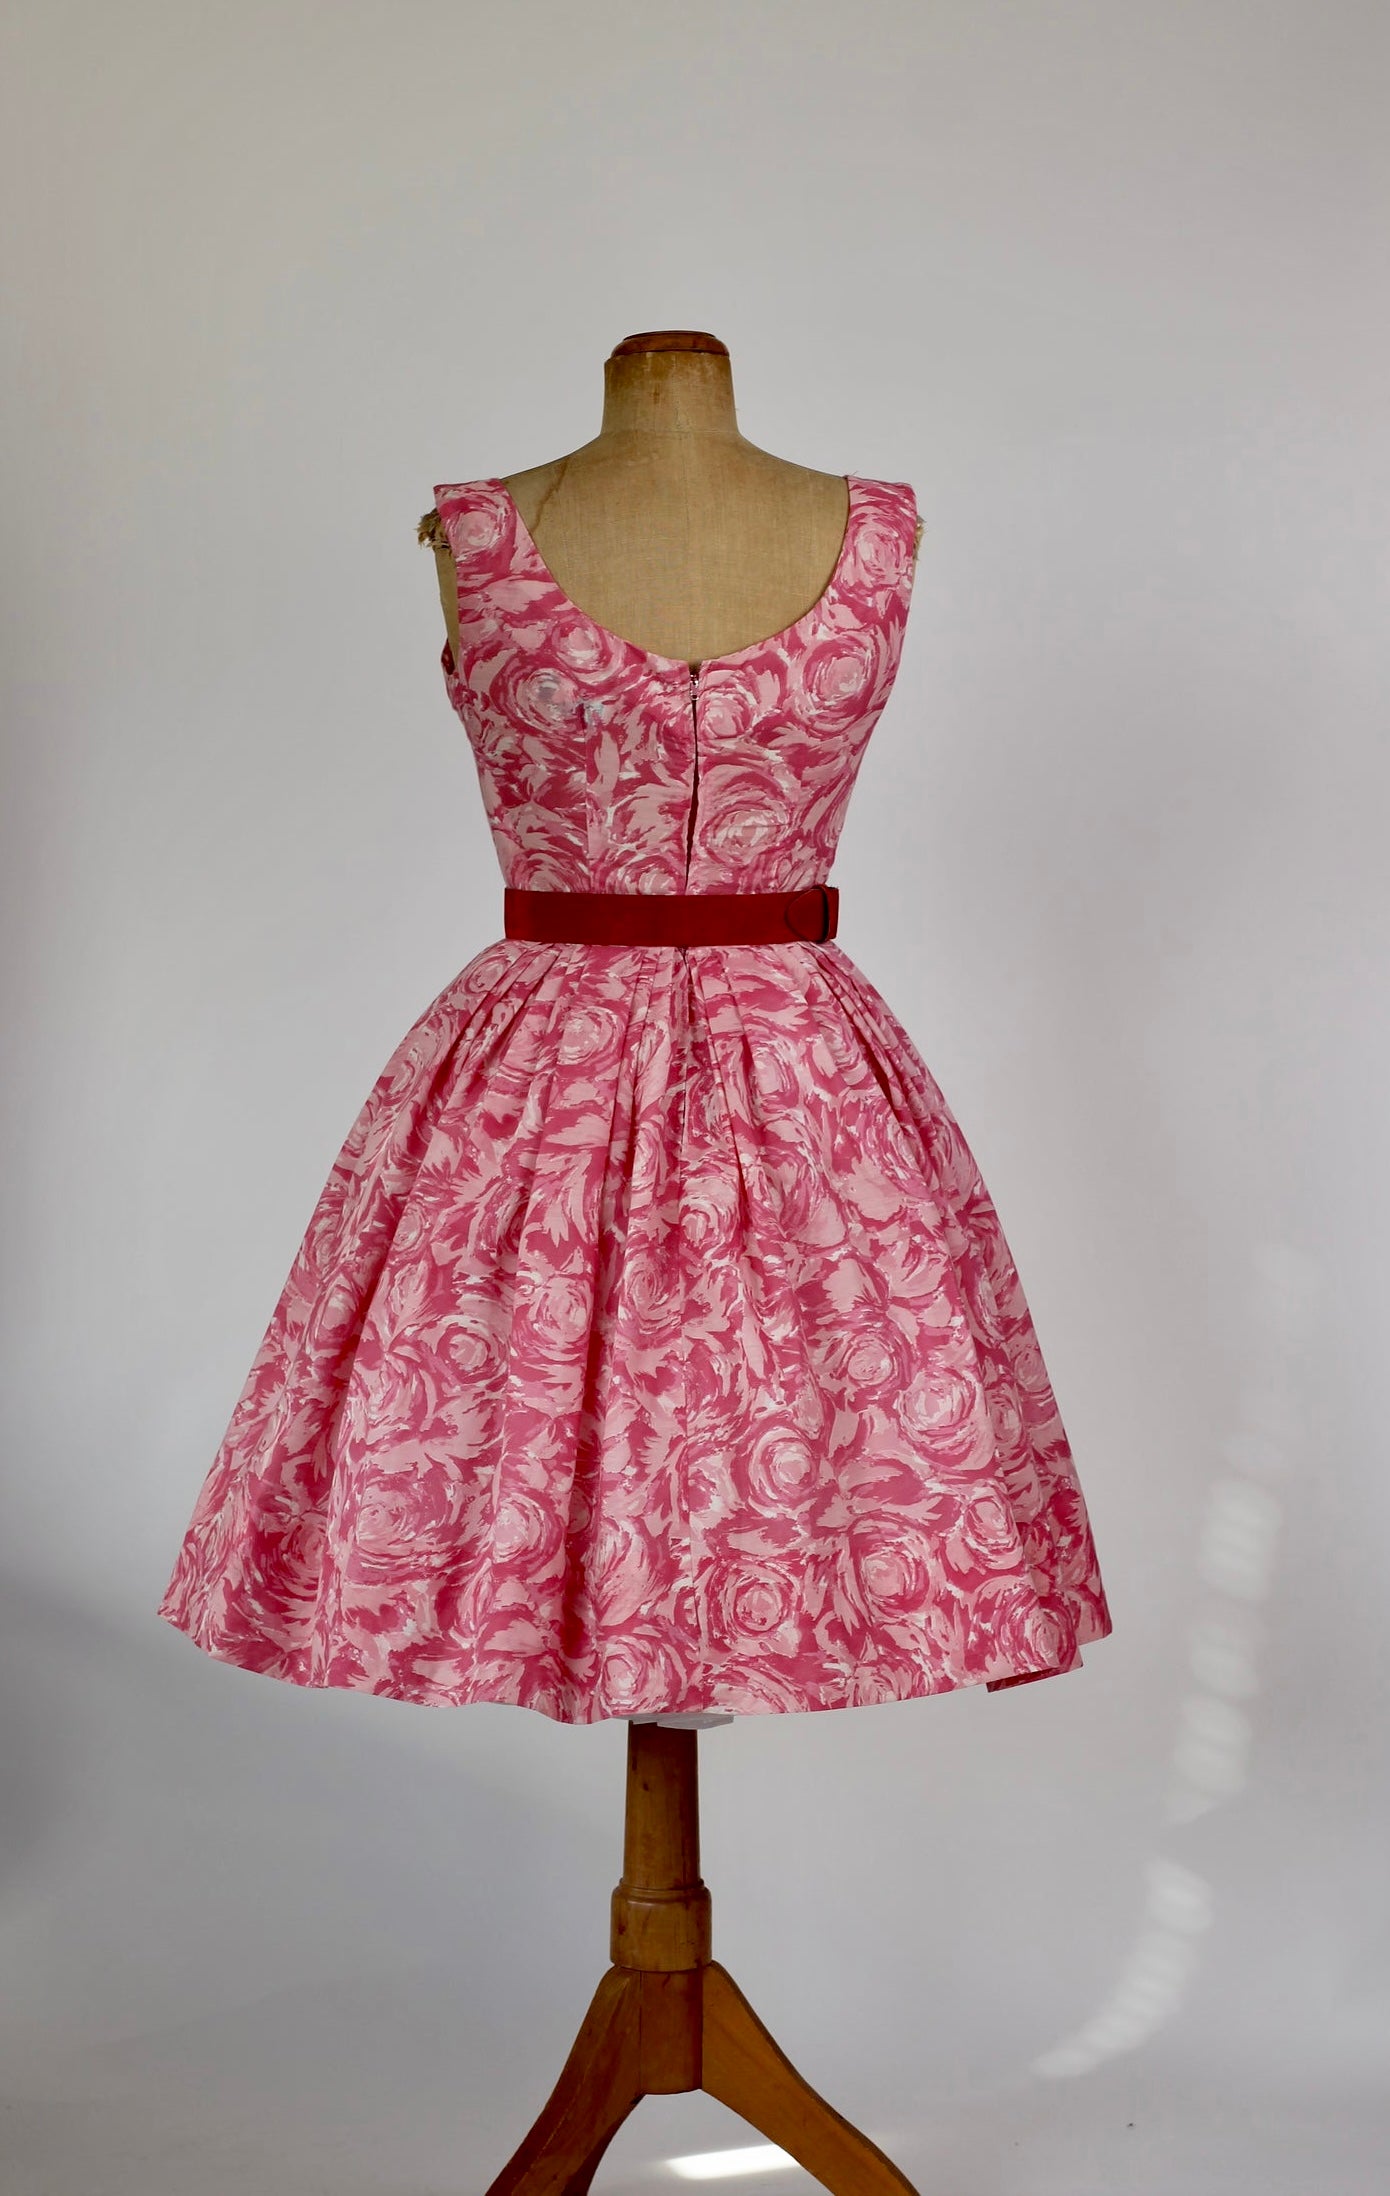 1950s Pink Cotton Dress with Floral Print//Size S